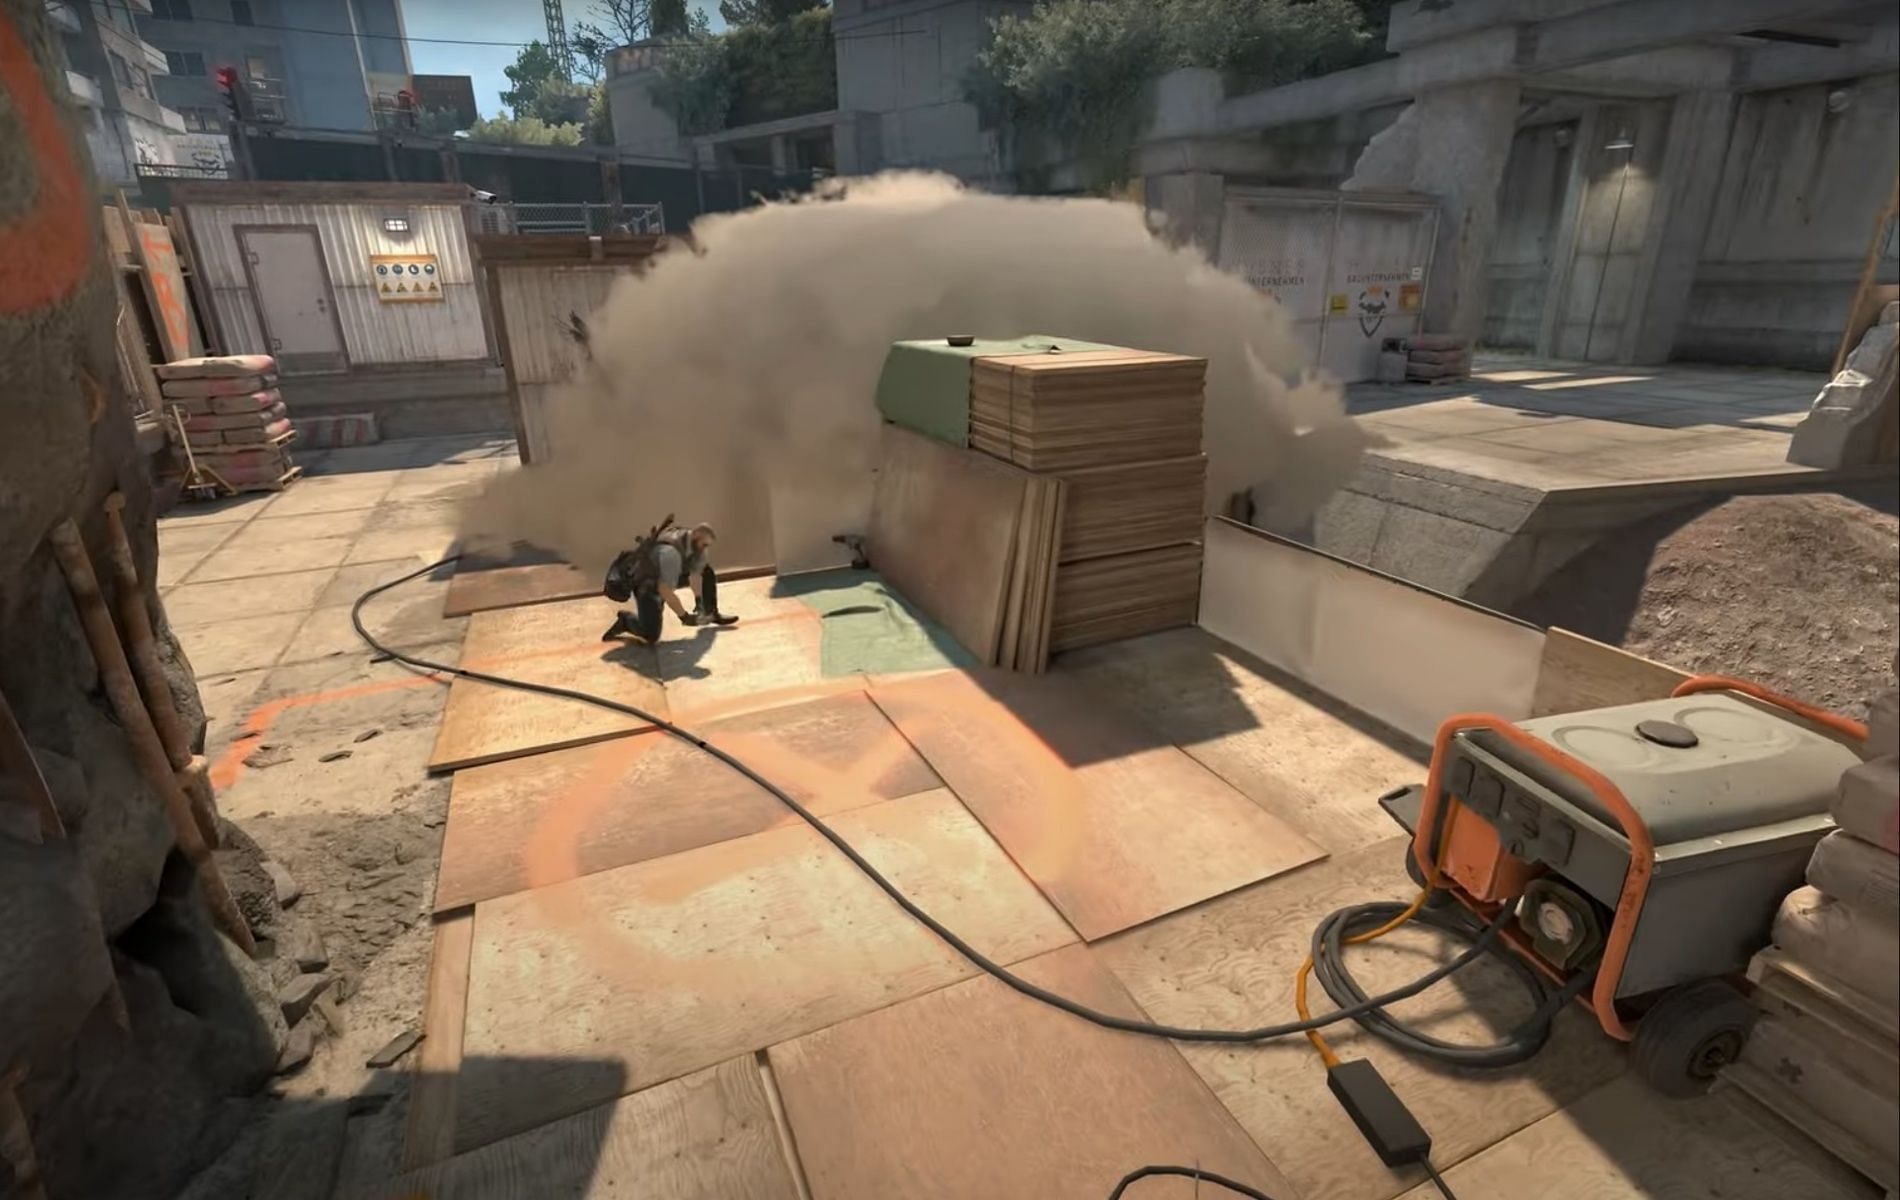 Confirmed Counter-Strike 2 maps